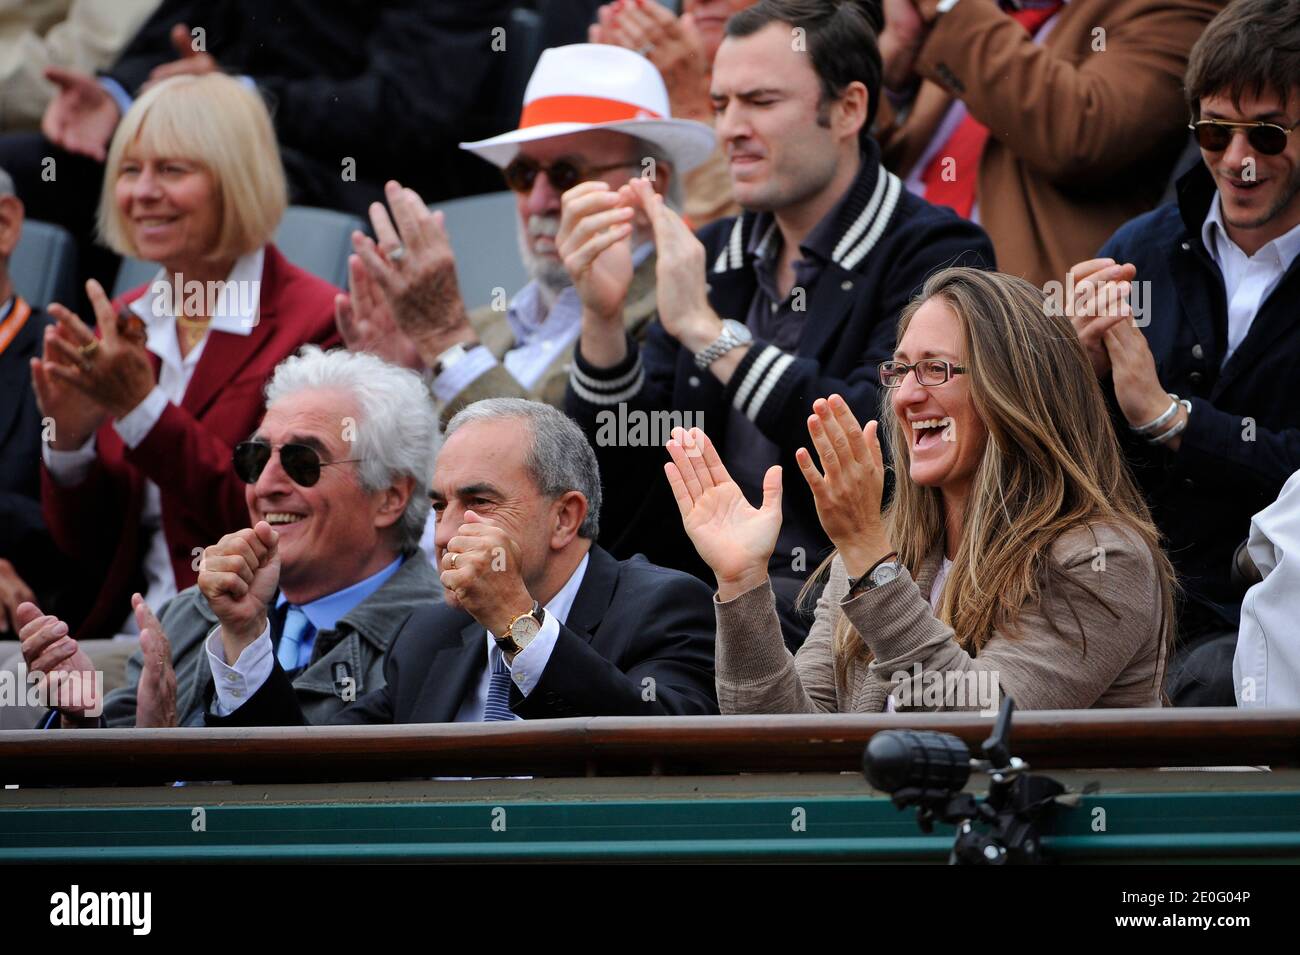 Mary Pierce attending the French Tennis Open 2012 at Roland Garros arena in Paris, France on June 5, 2012. Photo by Gorassini-Guibbaud/ABACAPRESS.COM Stock Photo